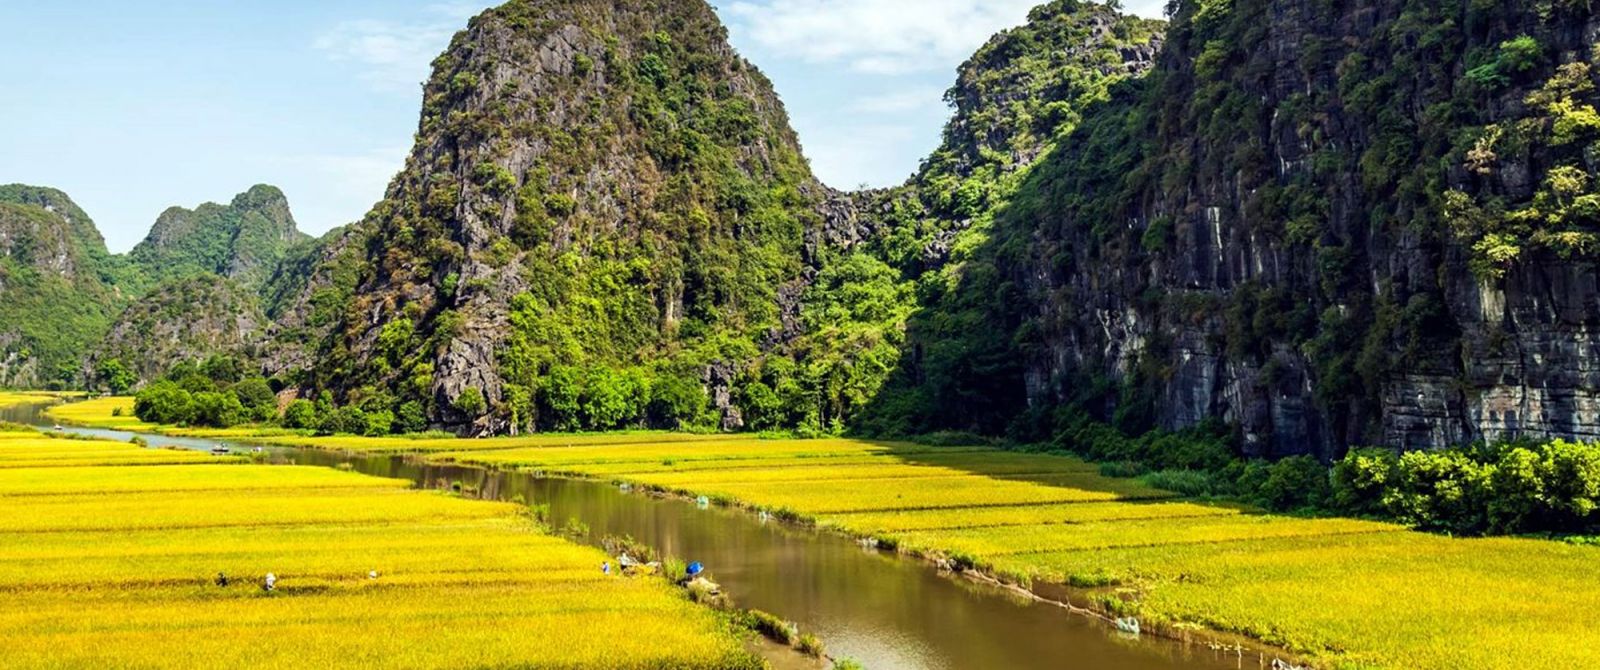 14 Day Vietnam Discovery Holiday